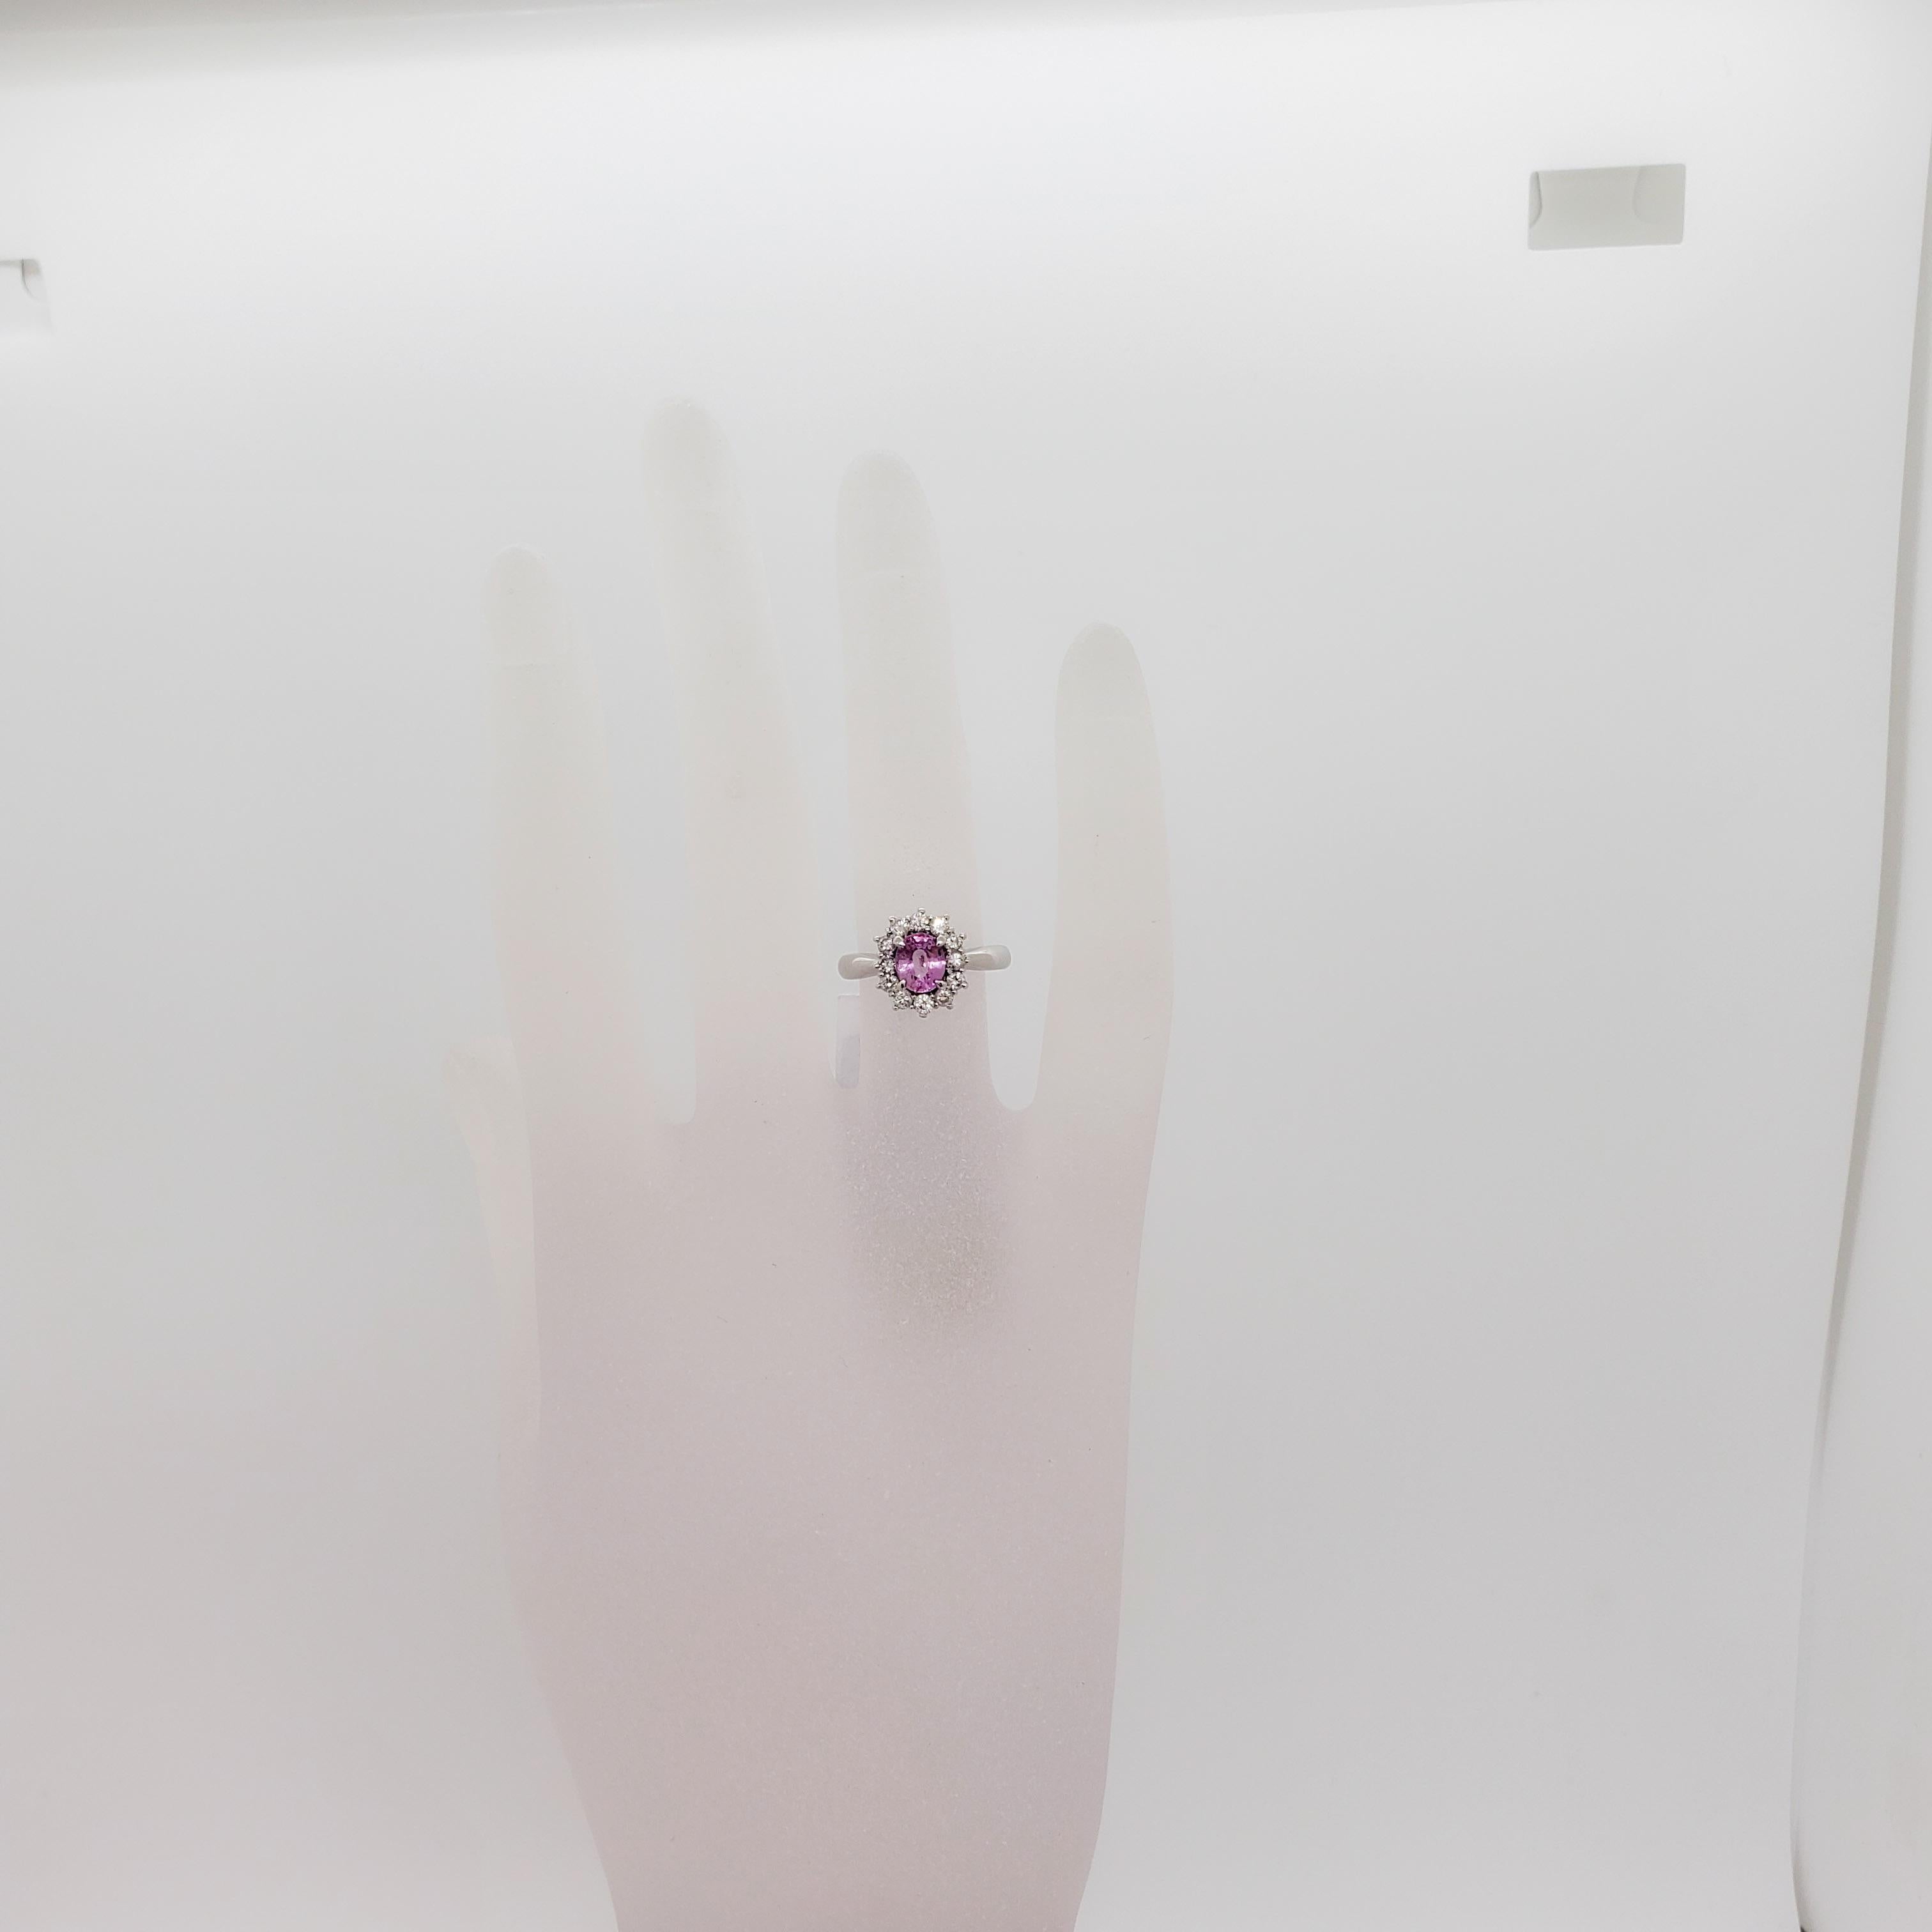 Beautiful bright pink color pink sapphire oval weighing 0.76 ct. with 0.30 ct. white diamond rounds.  Handmade platinum mounting in ring size 5.5.  